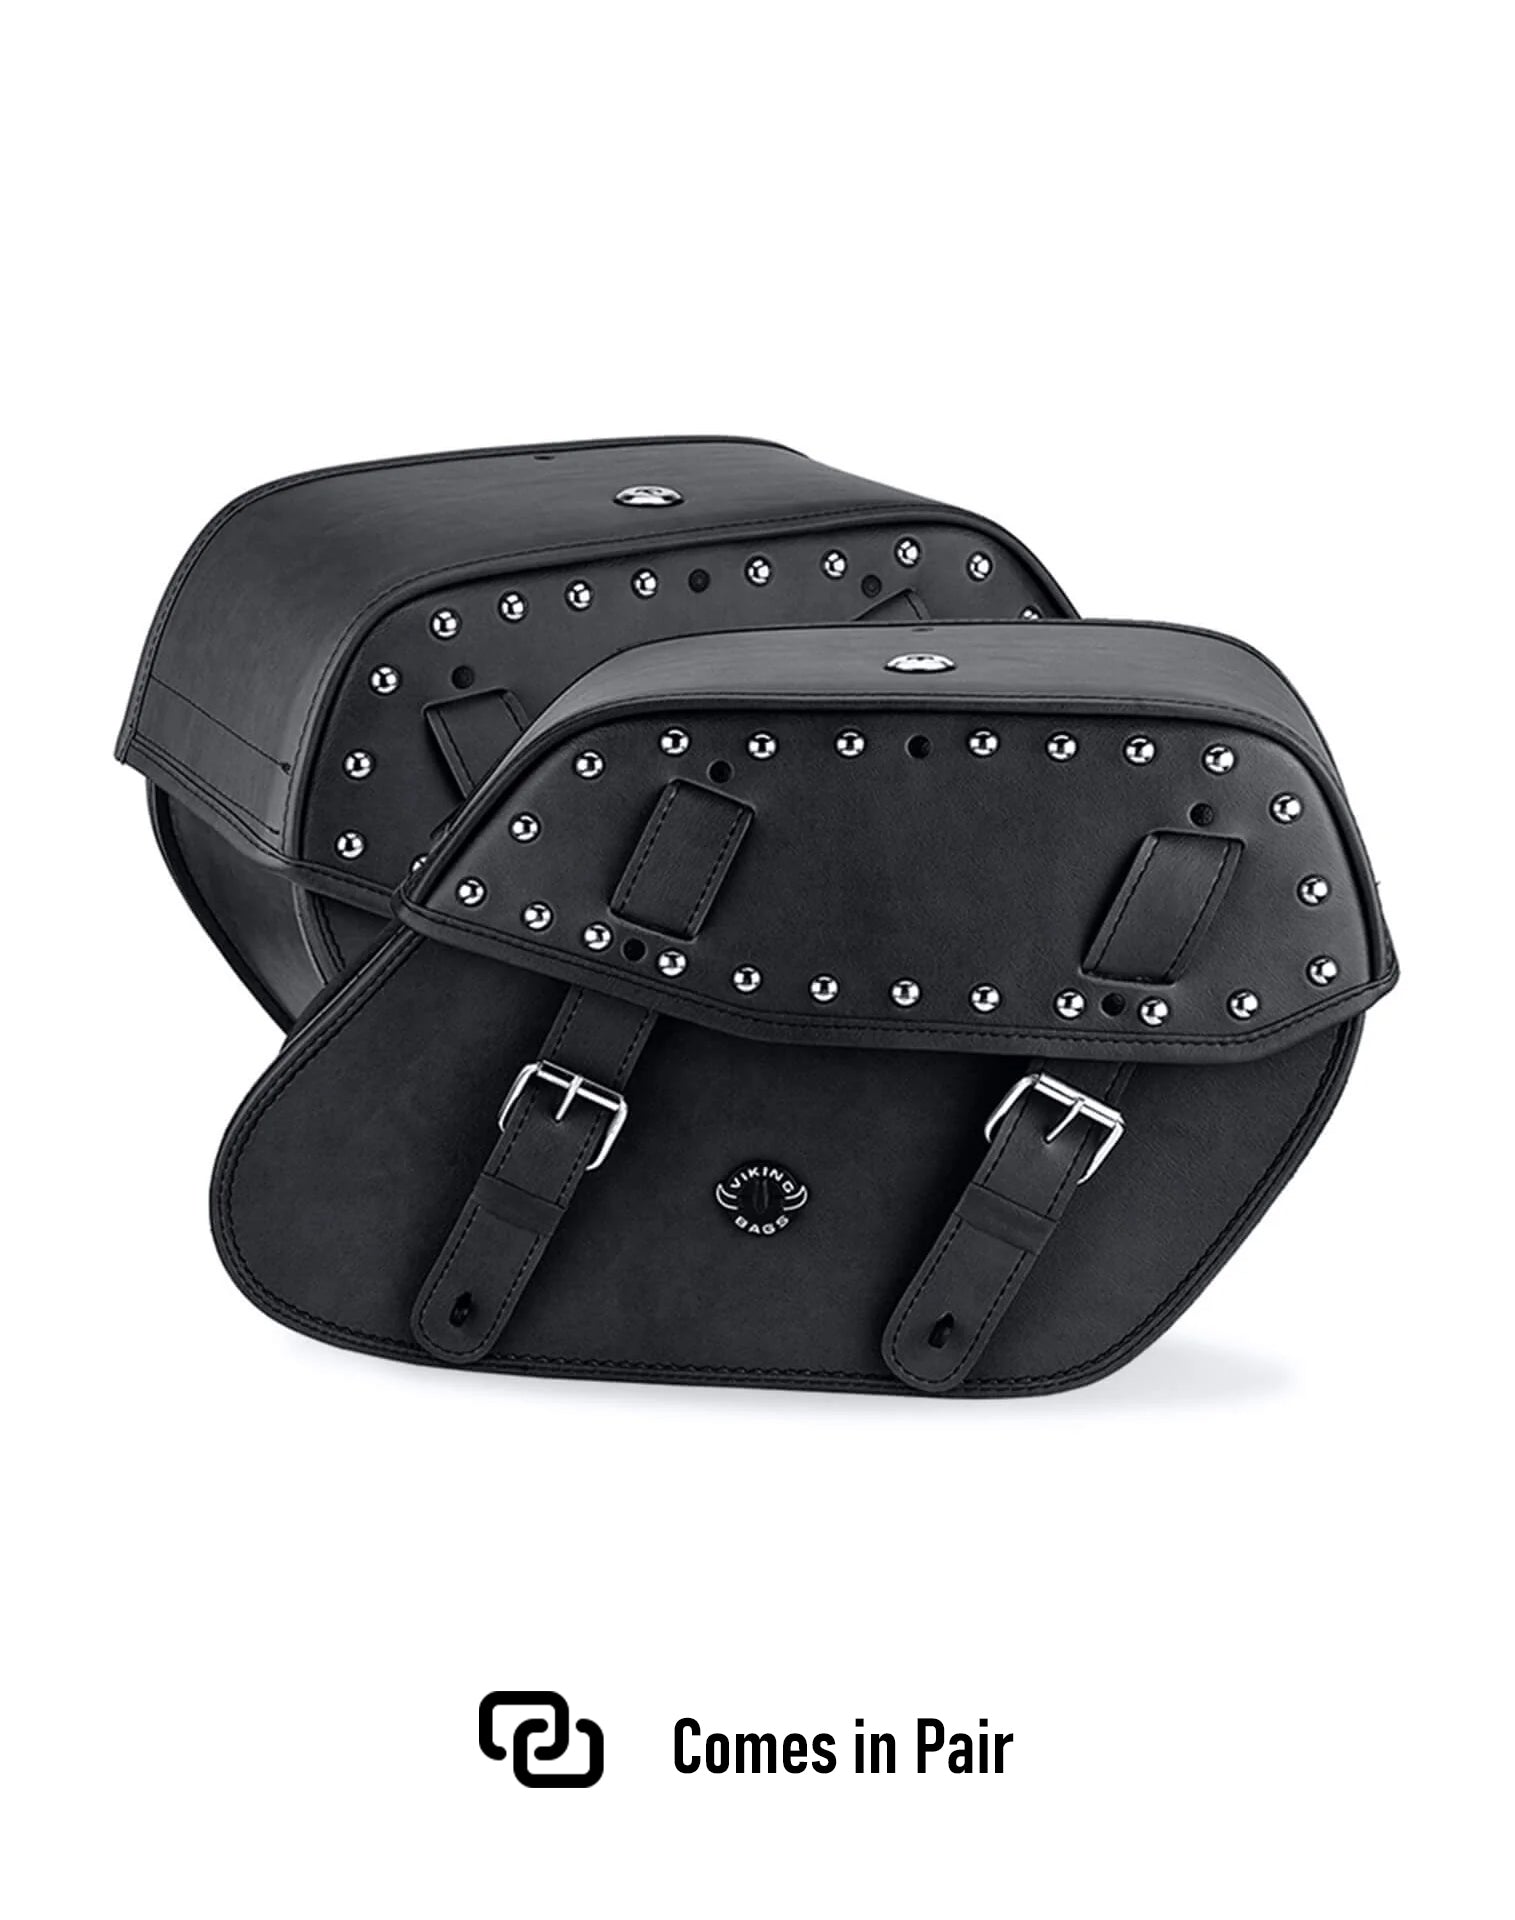 Viking Odin Large Studded Leather Motorcycle Saddlebags For Harley Softail Low Rider S Fxlrs Weather Resistant Bags Comes in Pair